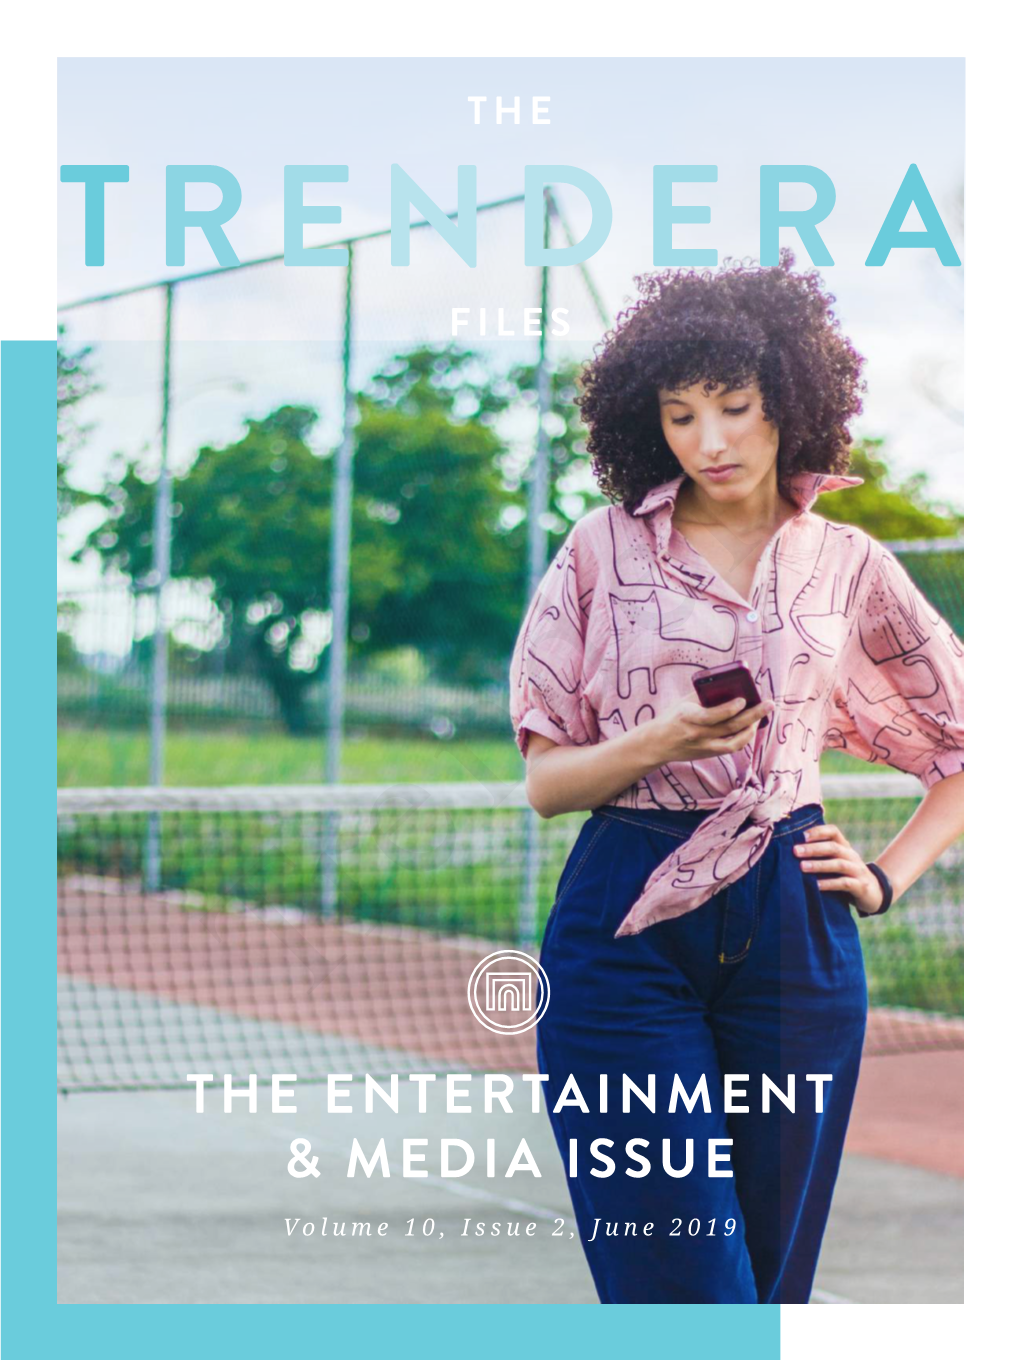 The Entertainment & Media Issue